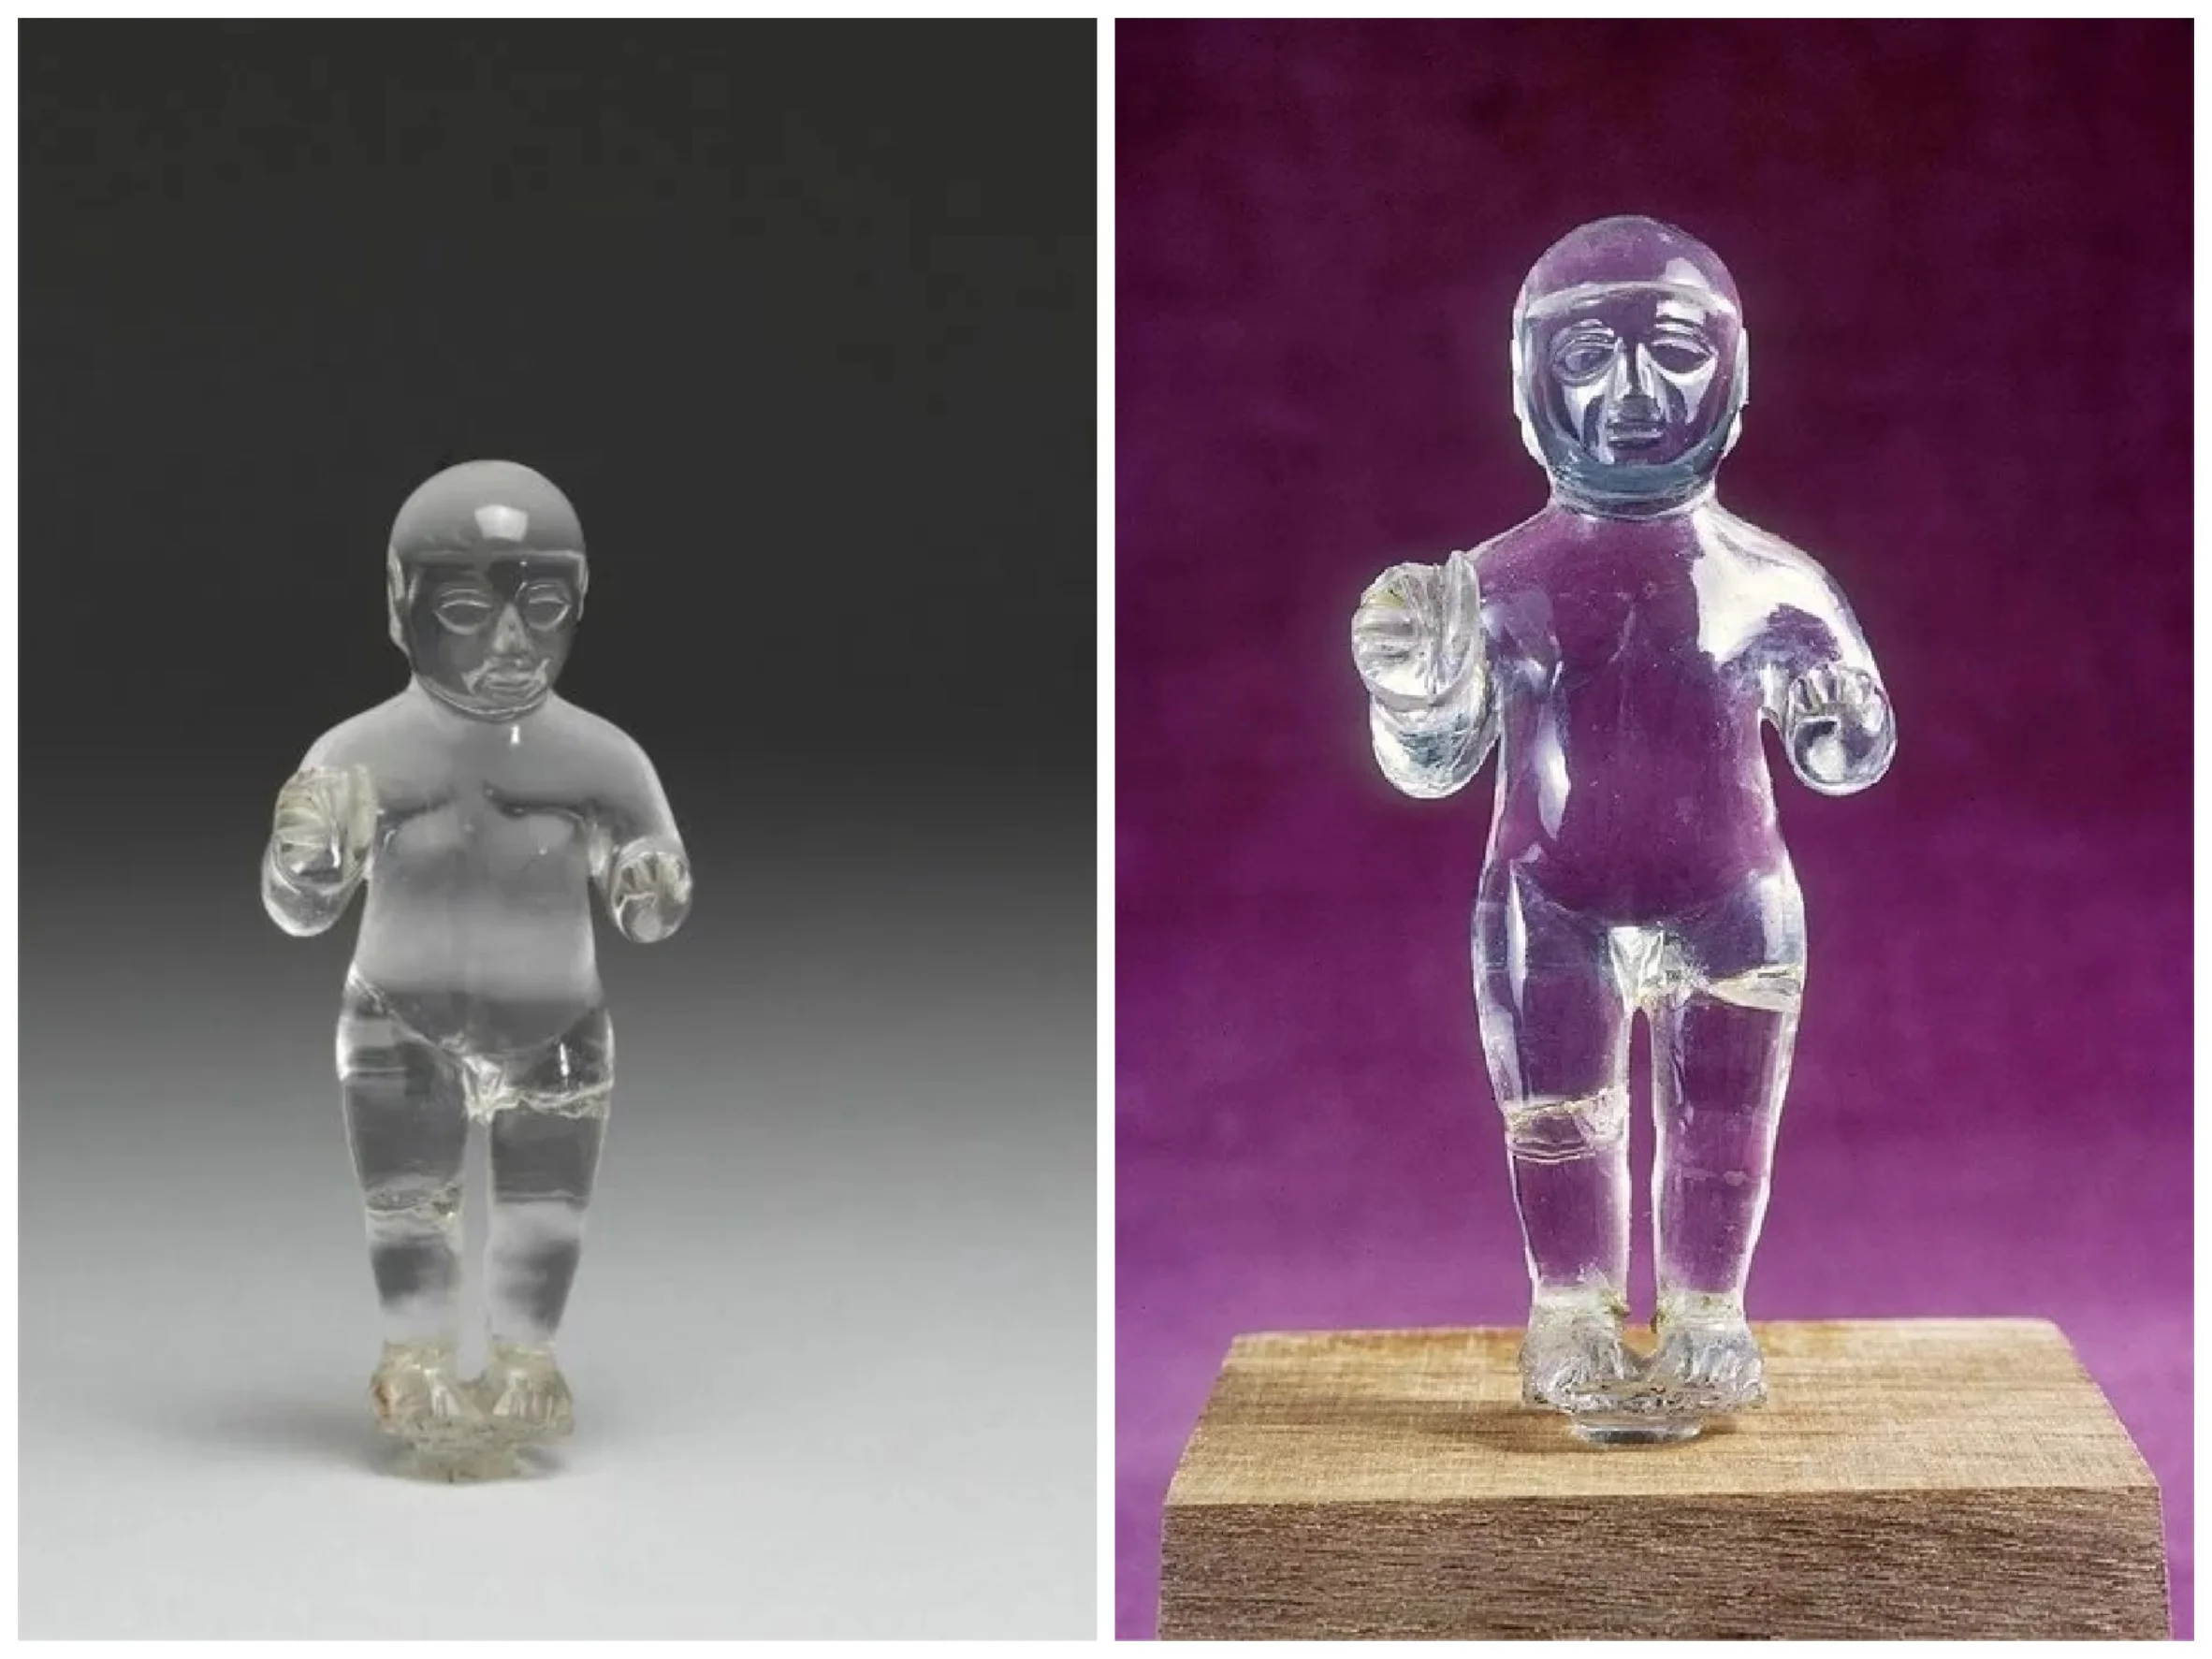 “Crystal astronaut” – an artifact that does not fit into the official story